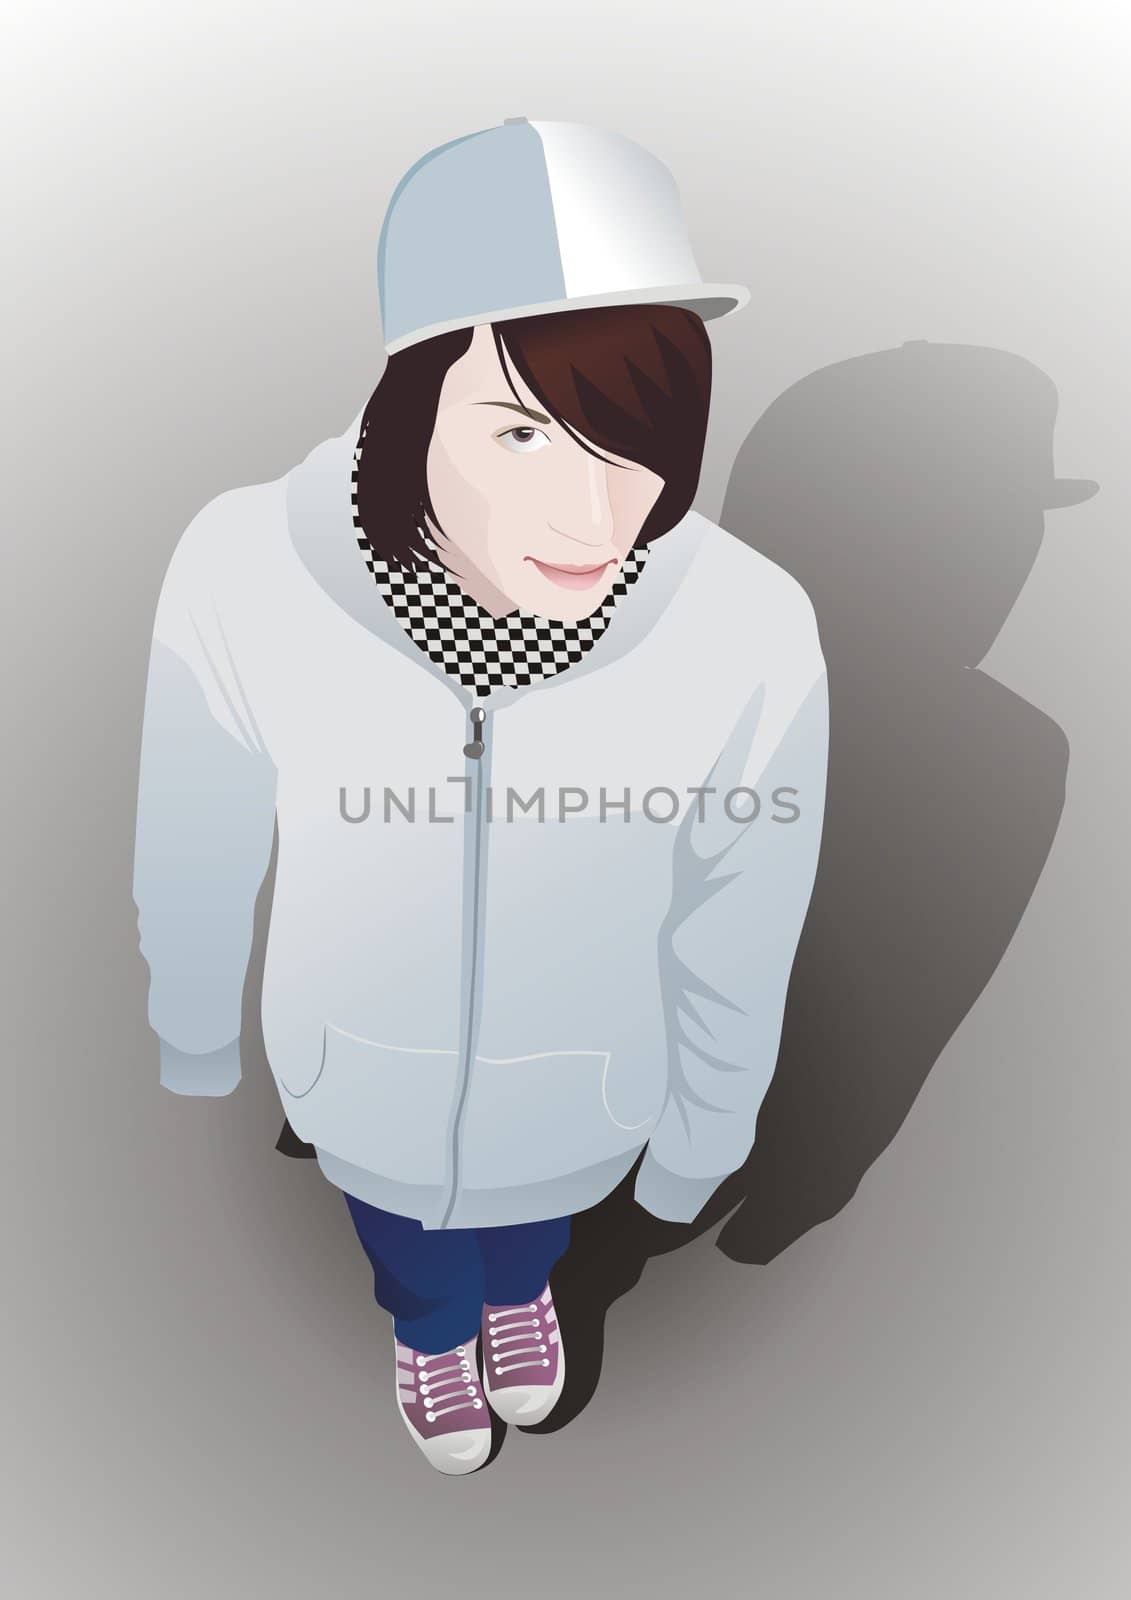 Drawing a teen boy in a cap and gumshoes, with long hair